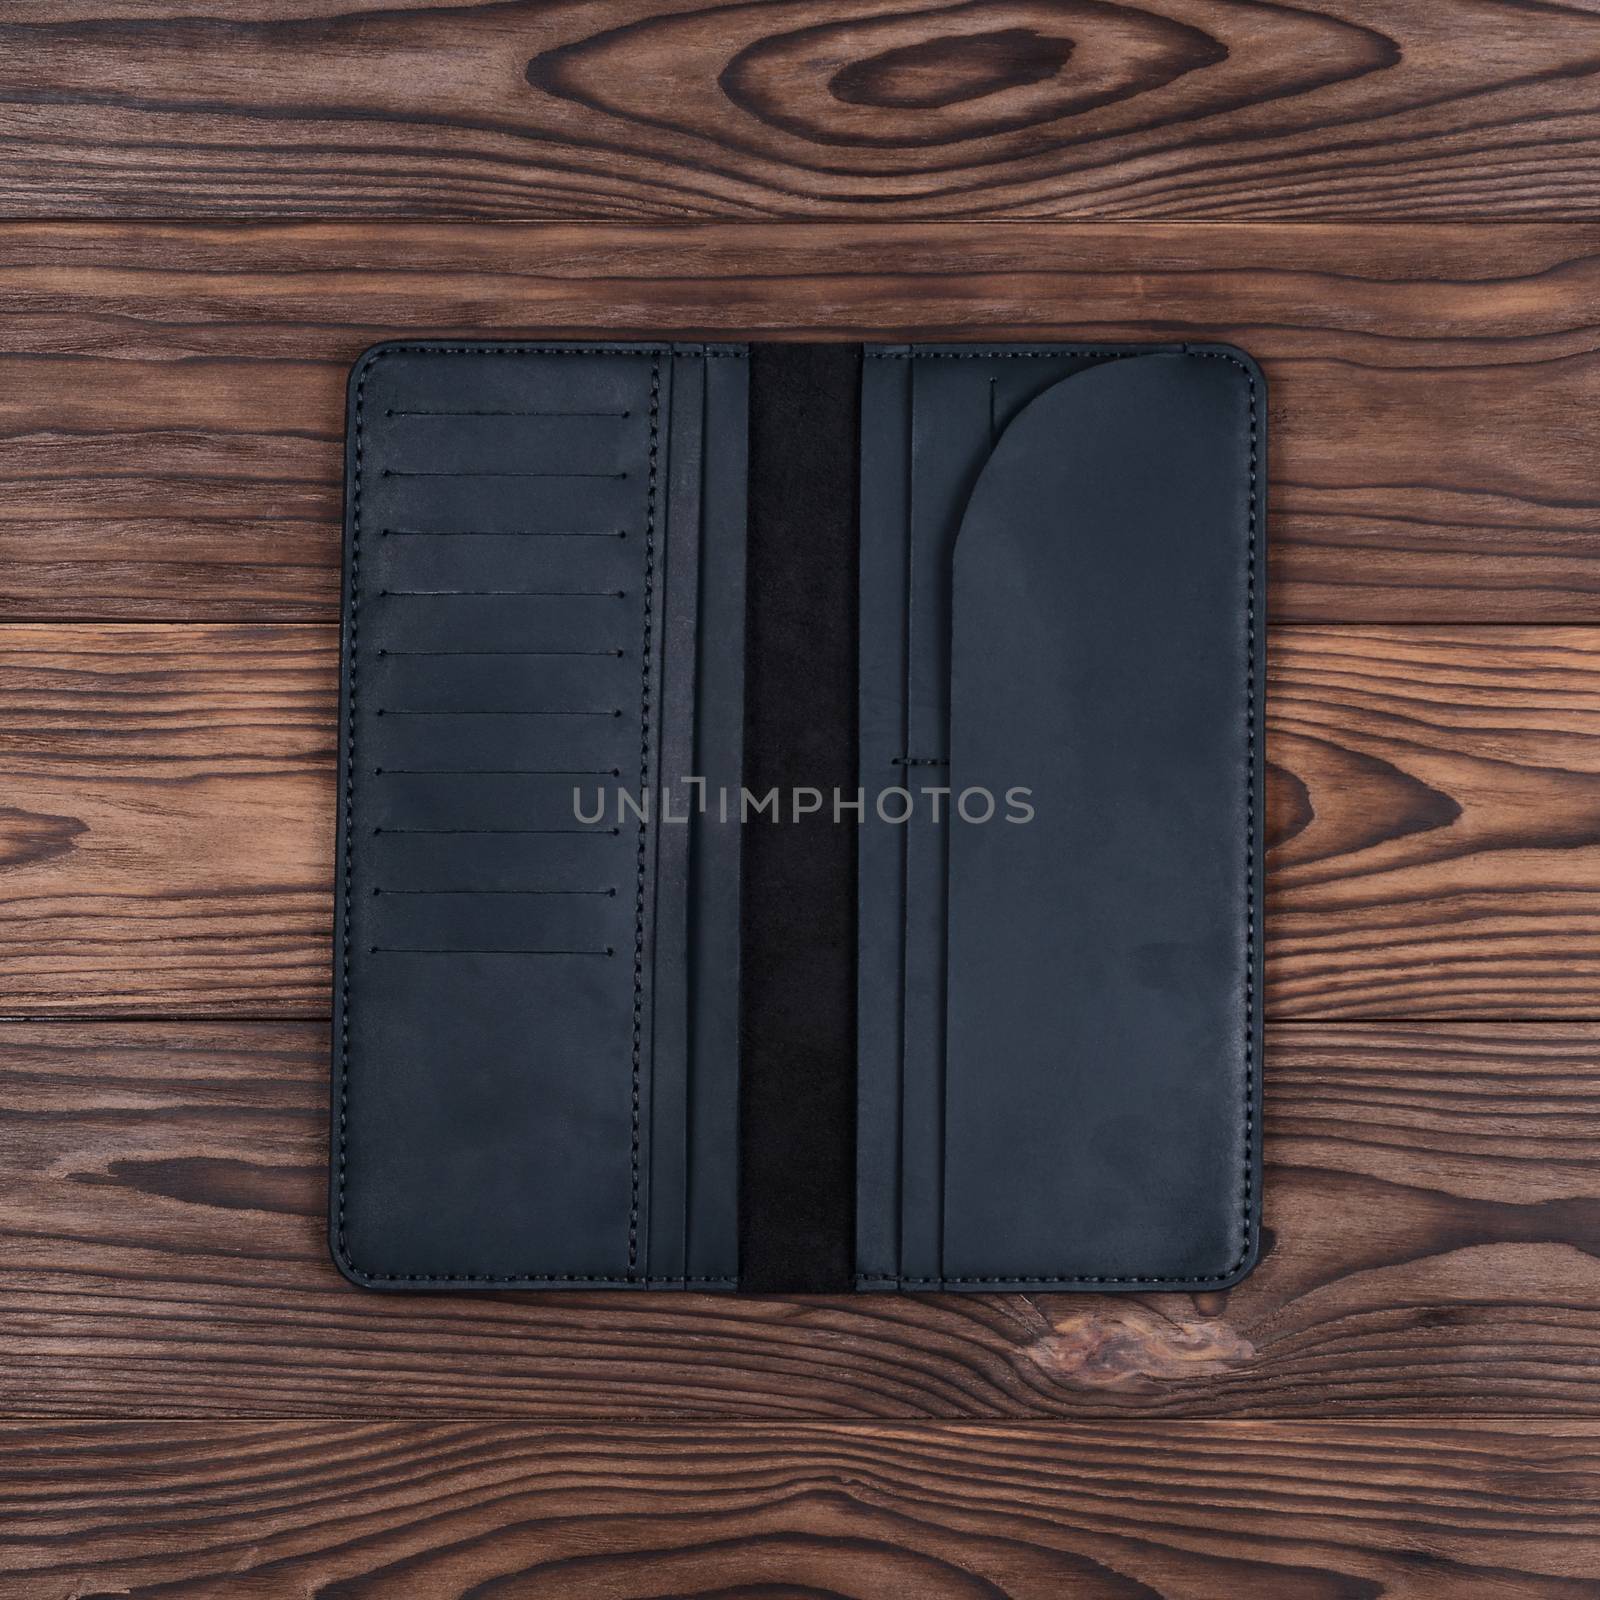 Handmade black travel wallet lies on textured wooden backgroud closeup. Wallet is open and empty. Up to down view. Stock photo of businessman accessories. by alexsdriver